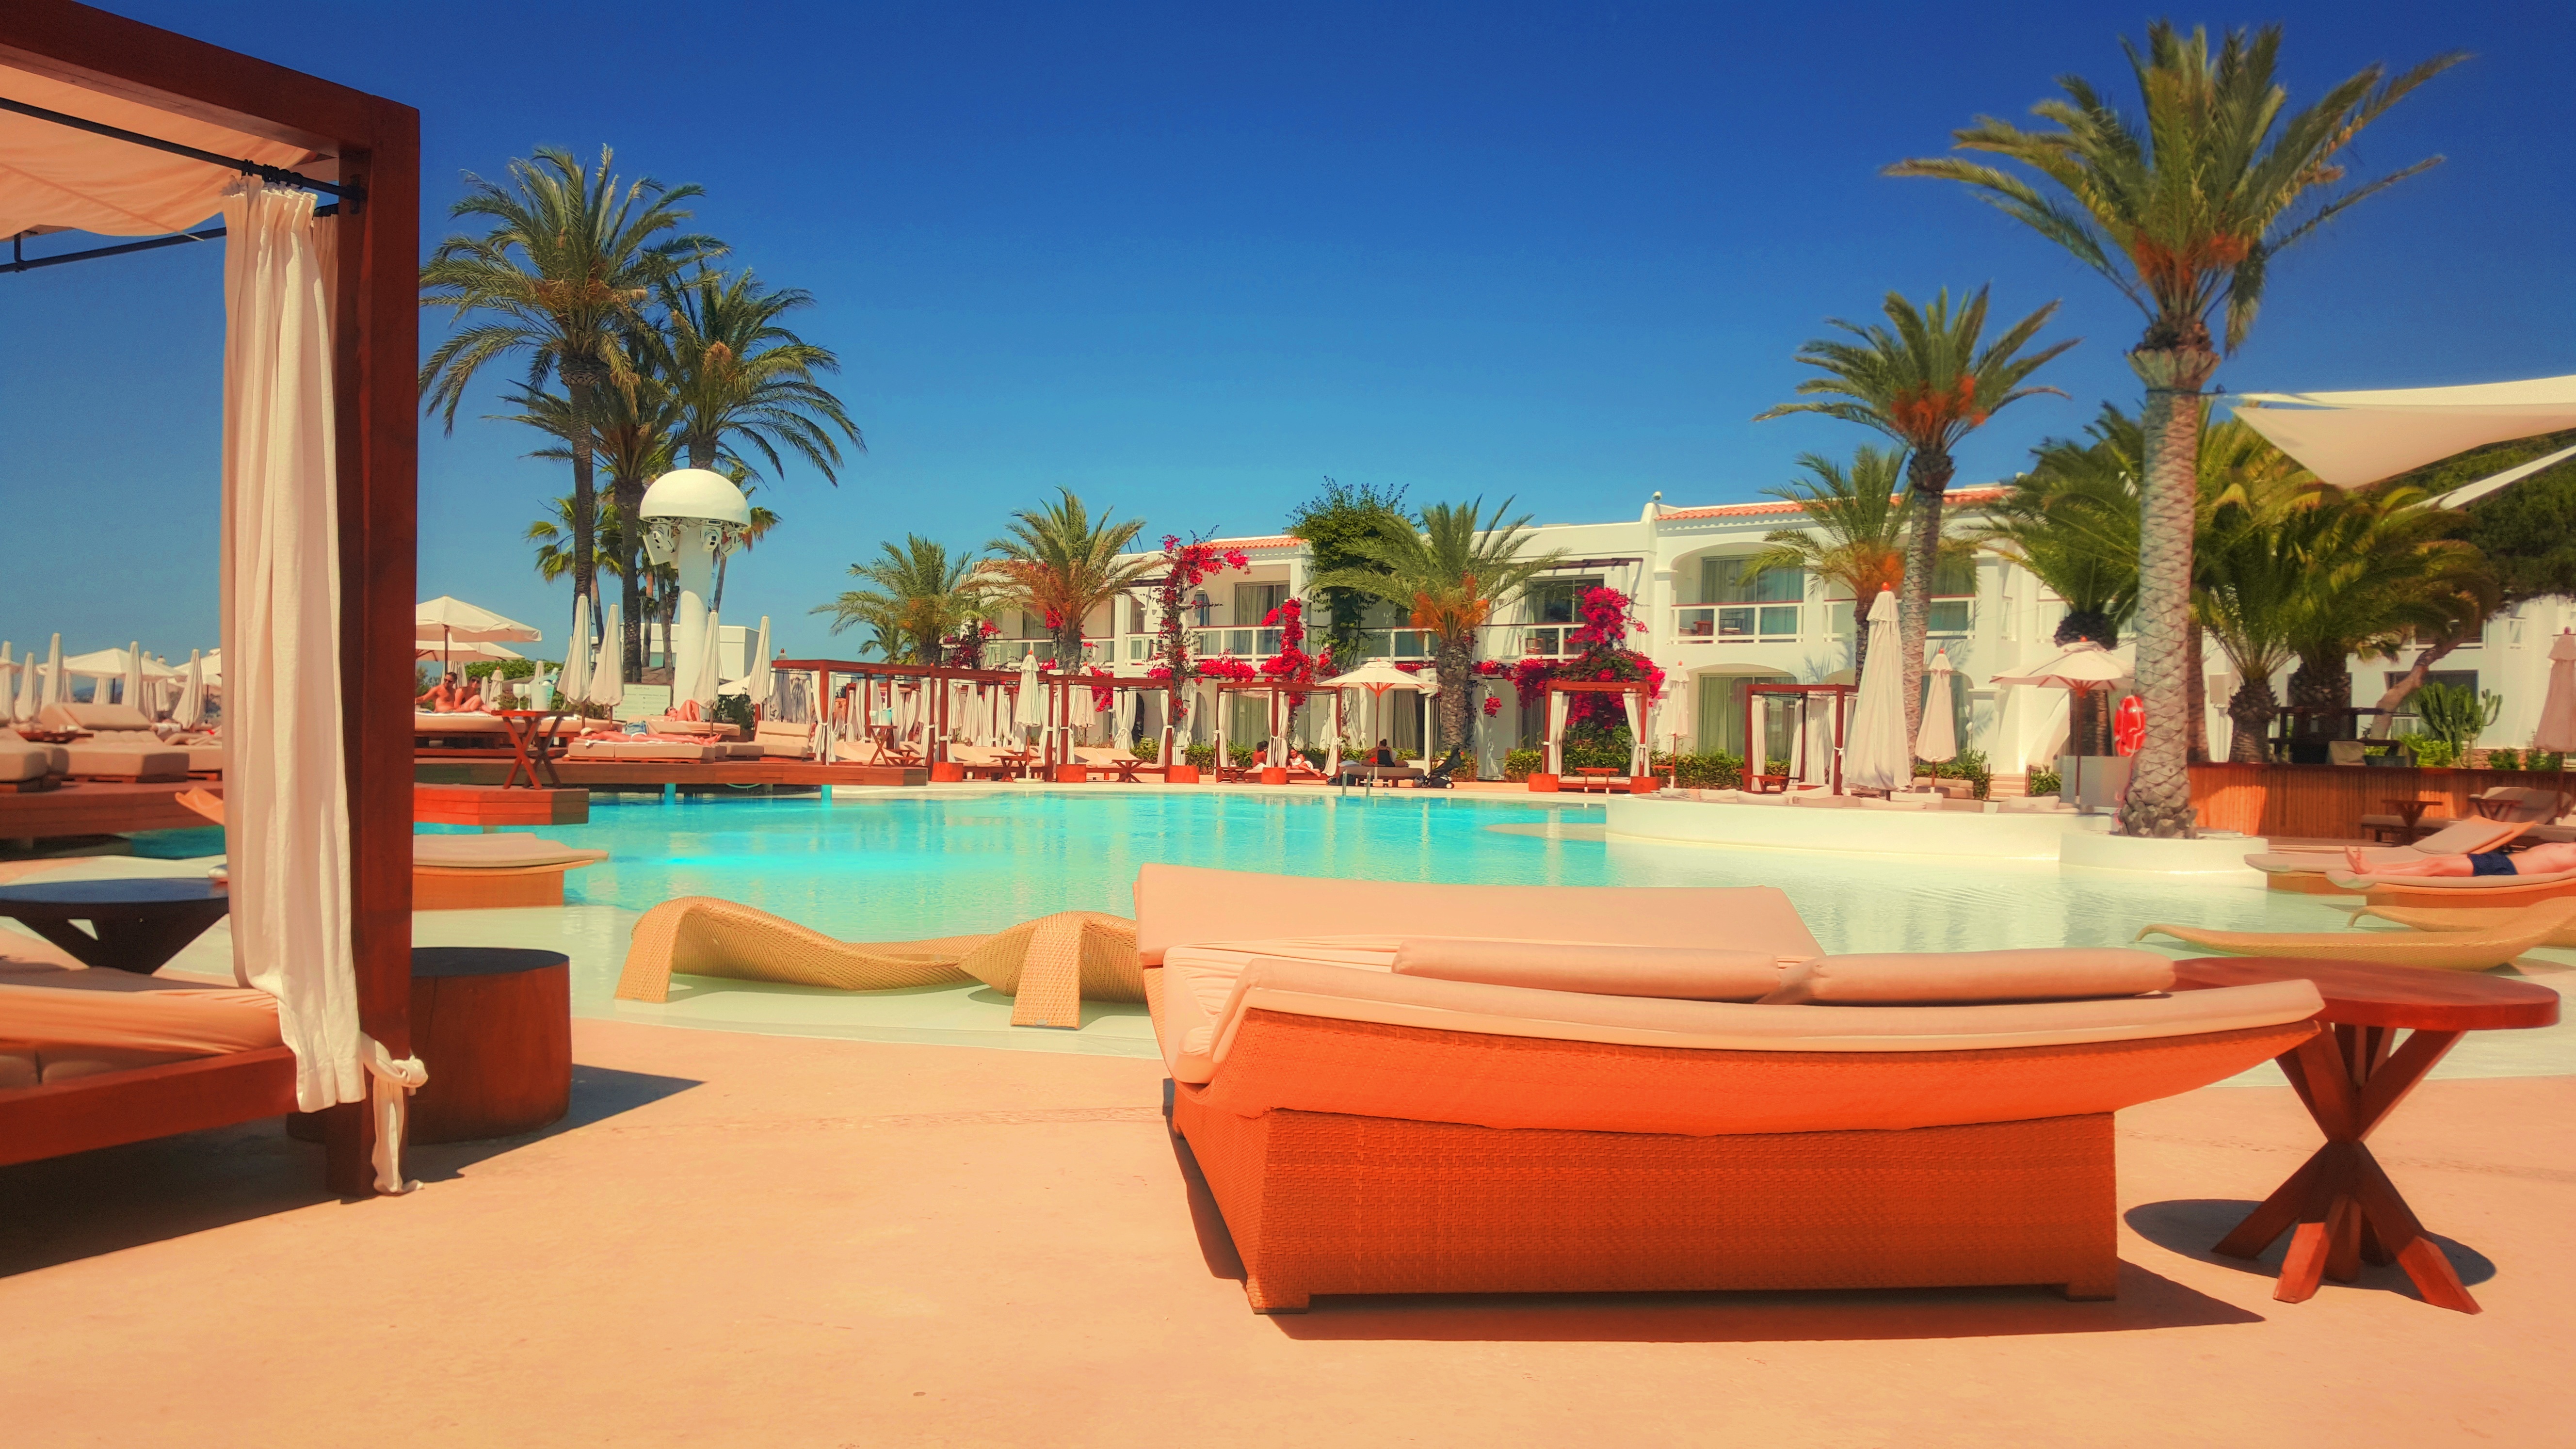 Wallpaper Full HD miscellaneous, palms, miscellanea, relaxation, rest, resort, pool, hotel, luxury